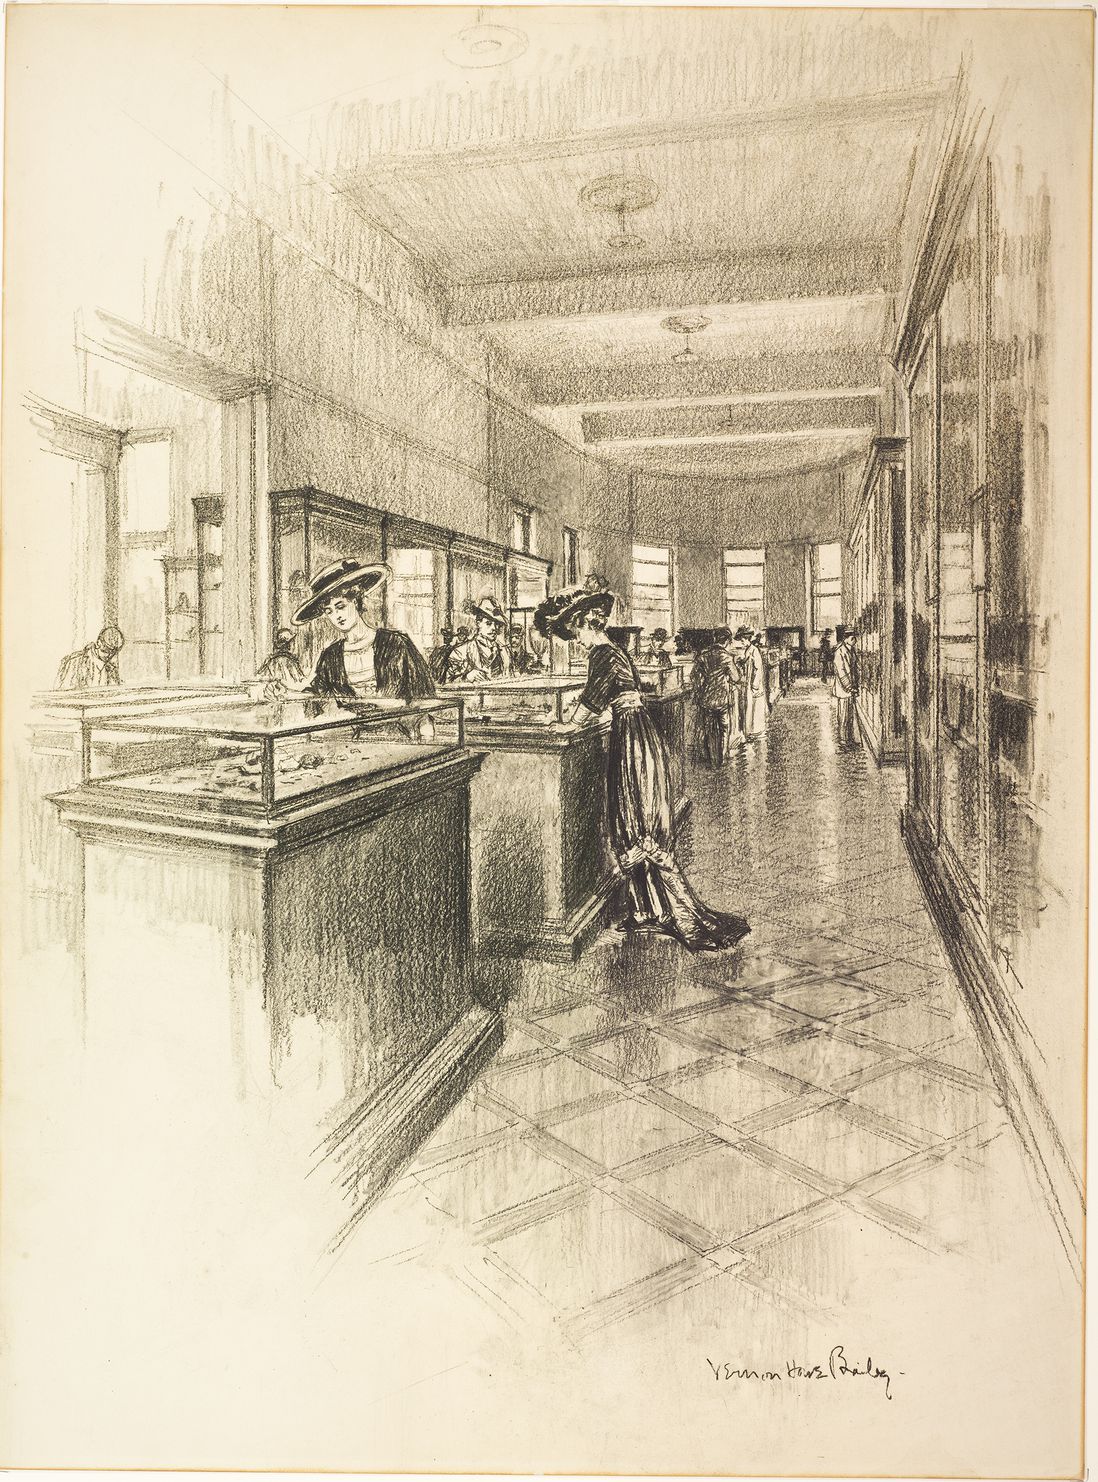 Minerals and Gems Hall drawing, 1910-1911. This charcoal drawing by Vernon Howe Bailey depicts the minerals section of the Museum’s original Hall of Minerals and Gems. (© AMNH Library 28733)